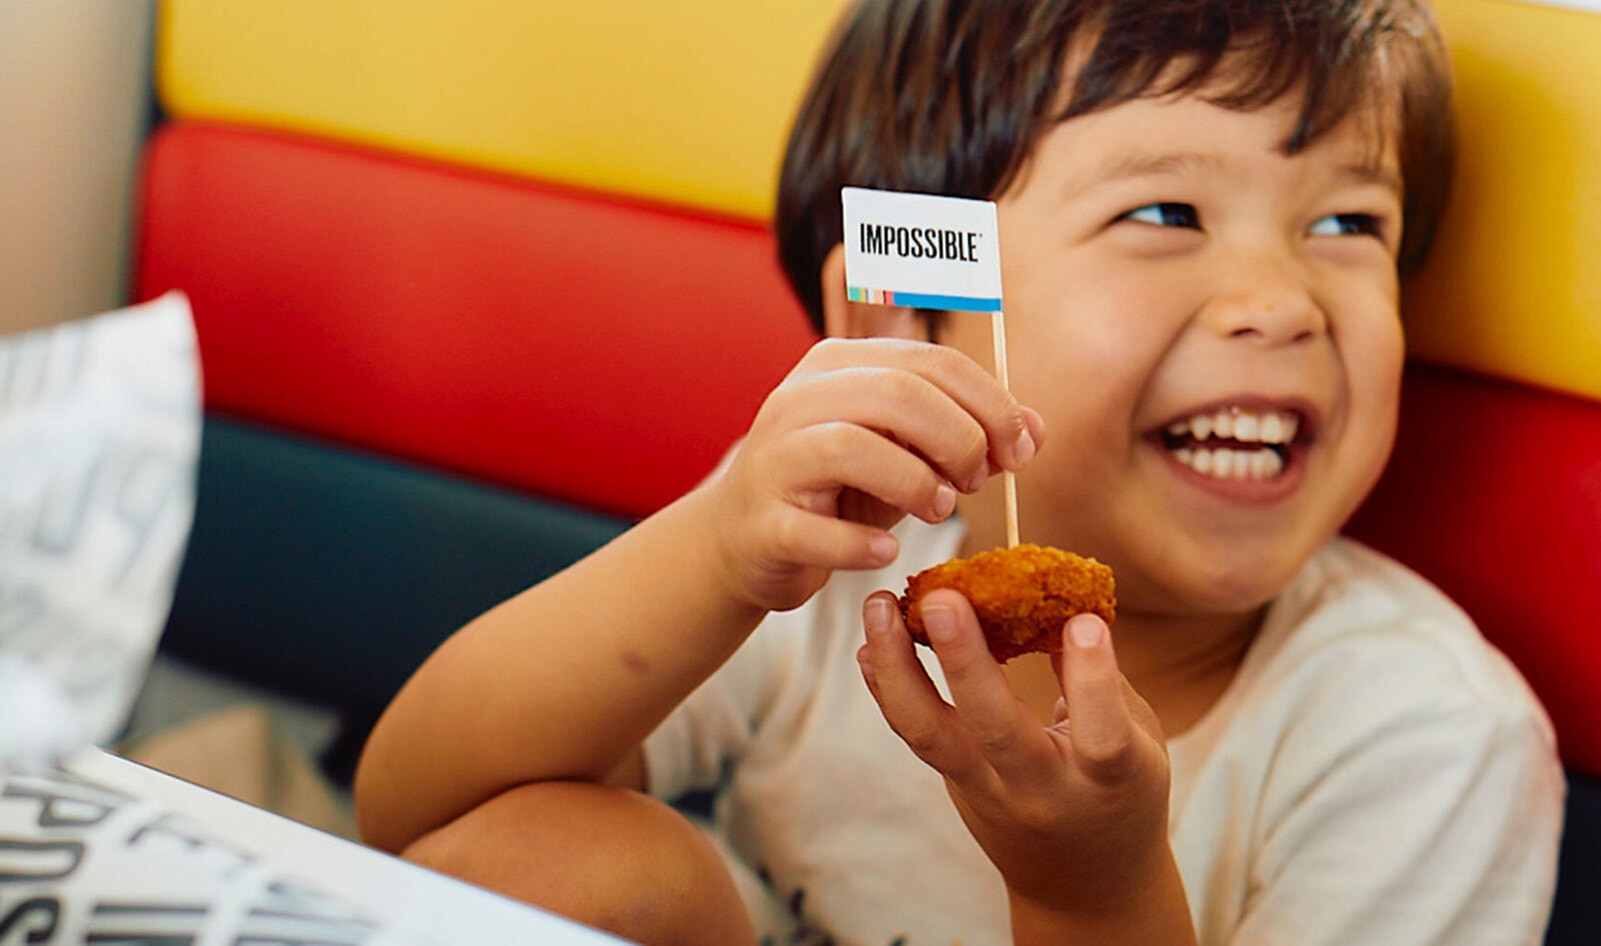 With California’s $700 Million for Plant-Based School Lunches, Impossible Foods Launches 2 Easy Options&nbsp;